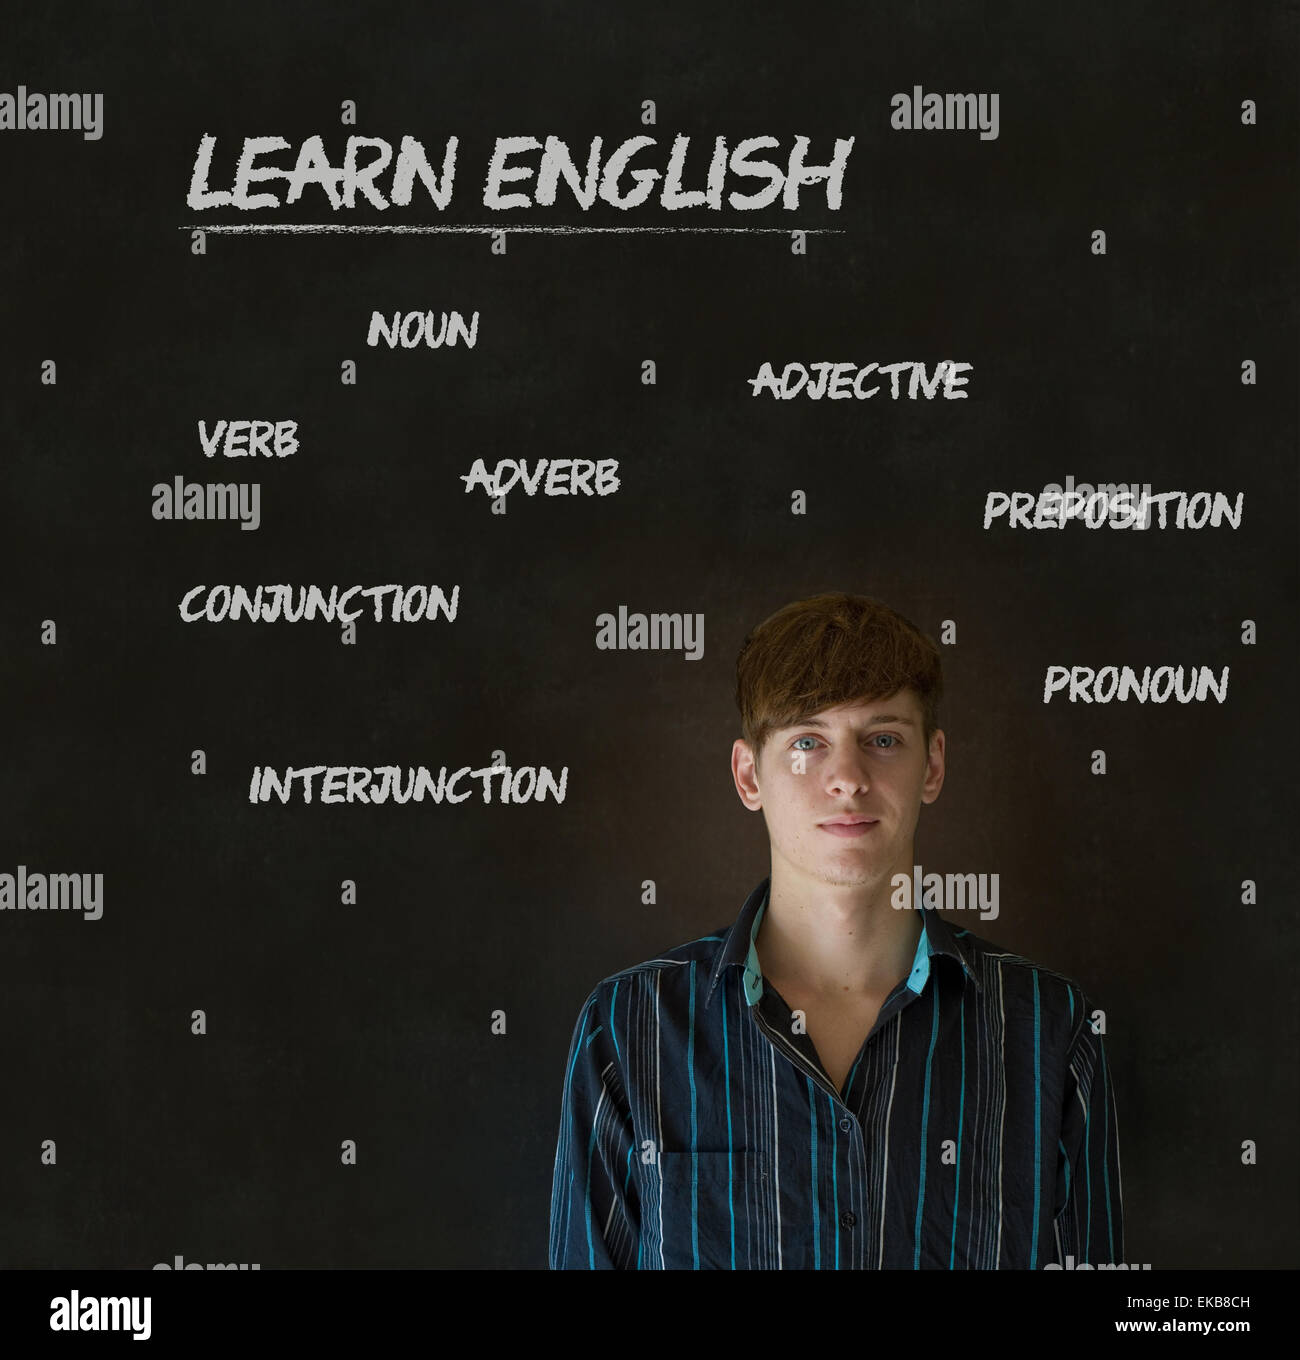 Learn English teacher with chalk background Stock Photo